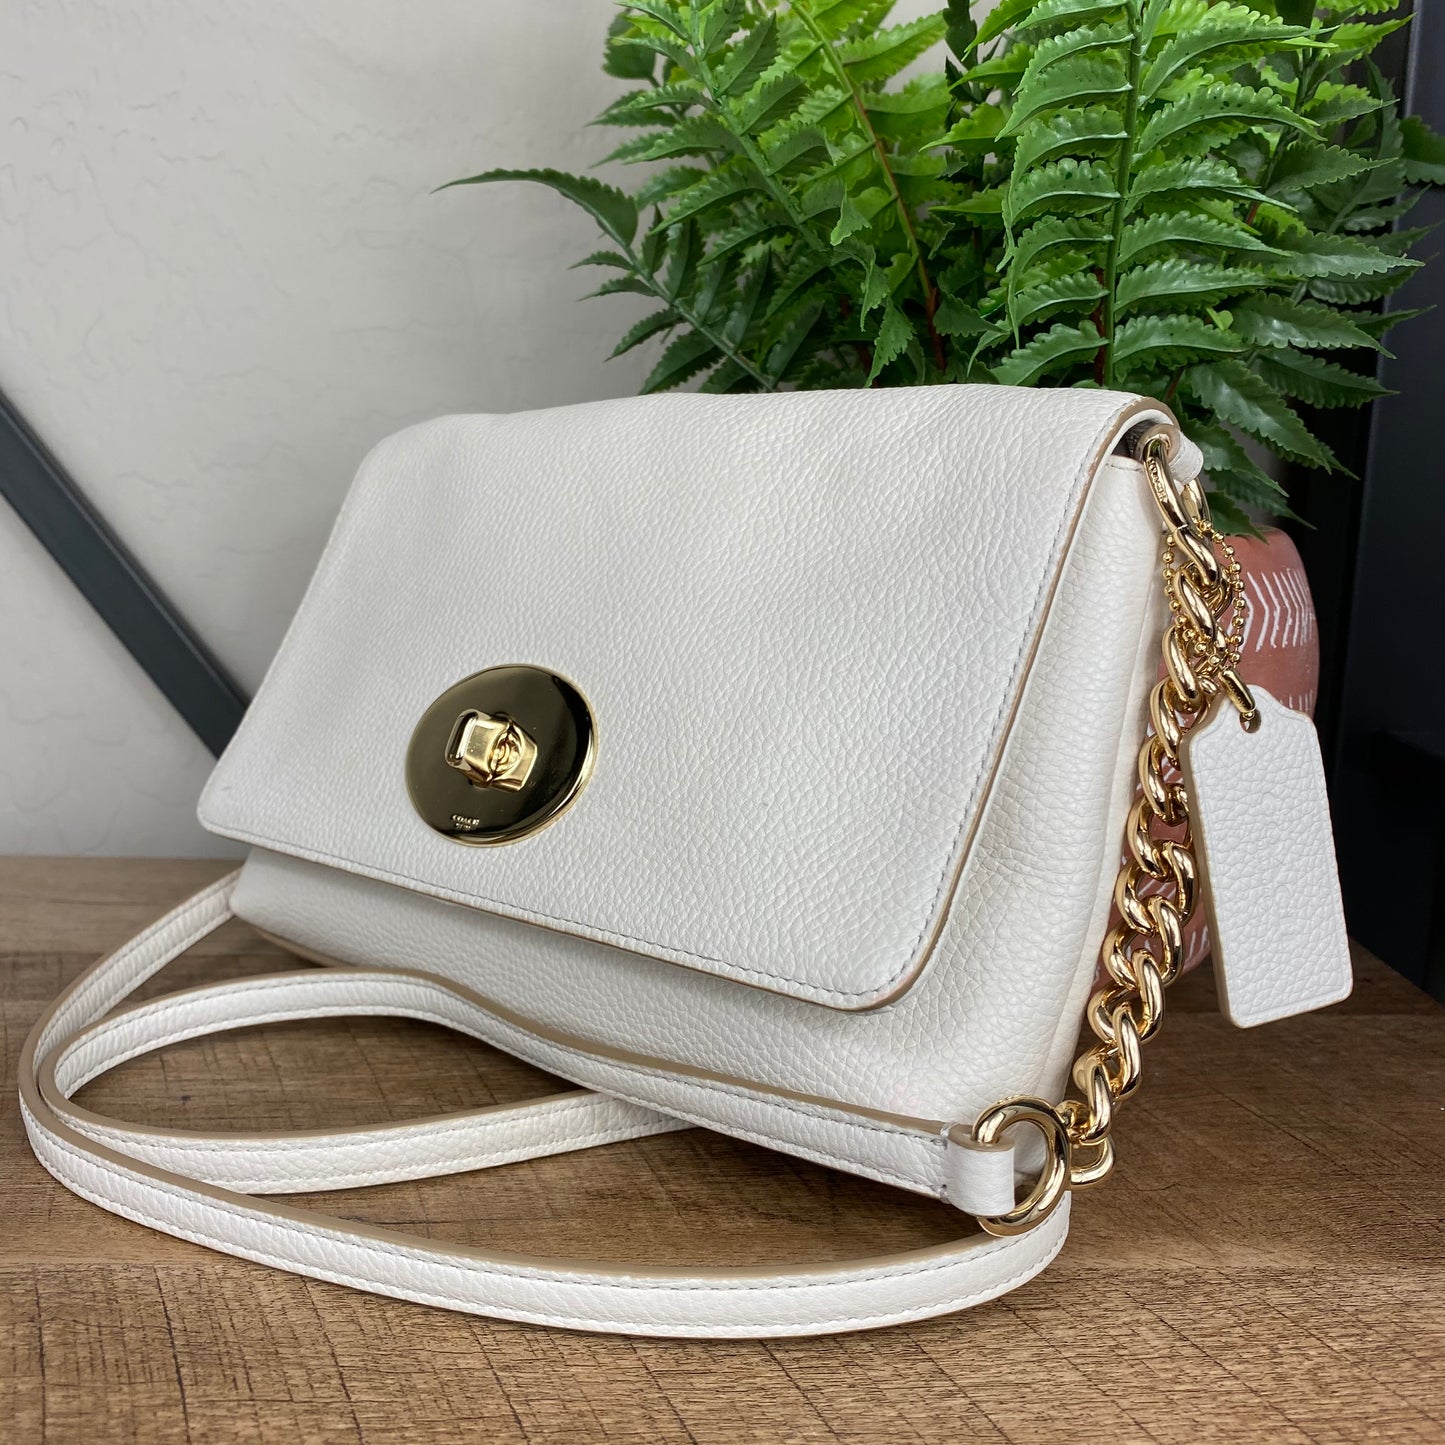 Coach Crosstown Polished Pebble Leather Crossbody